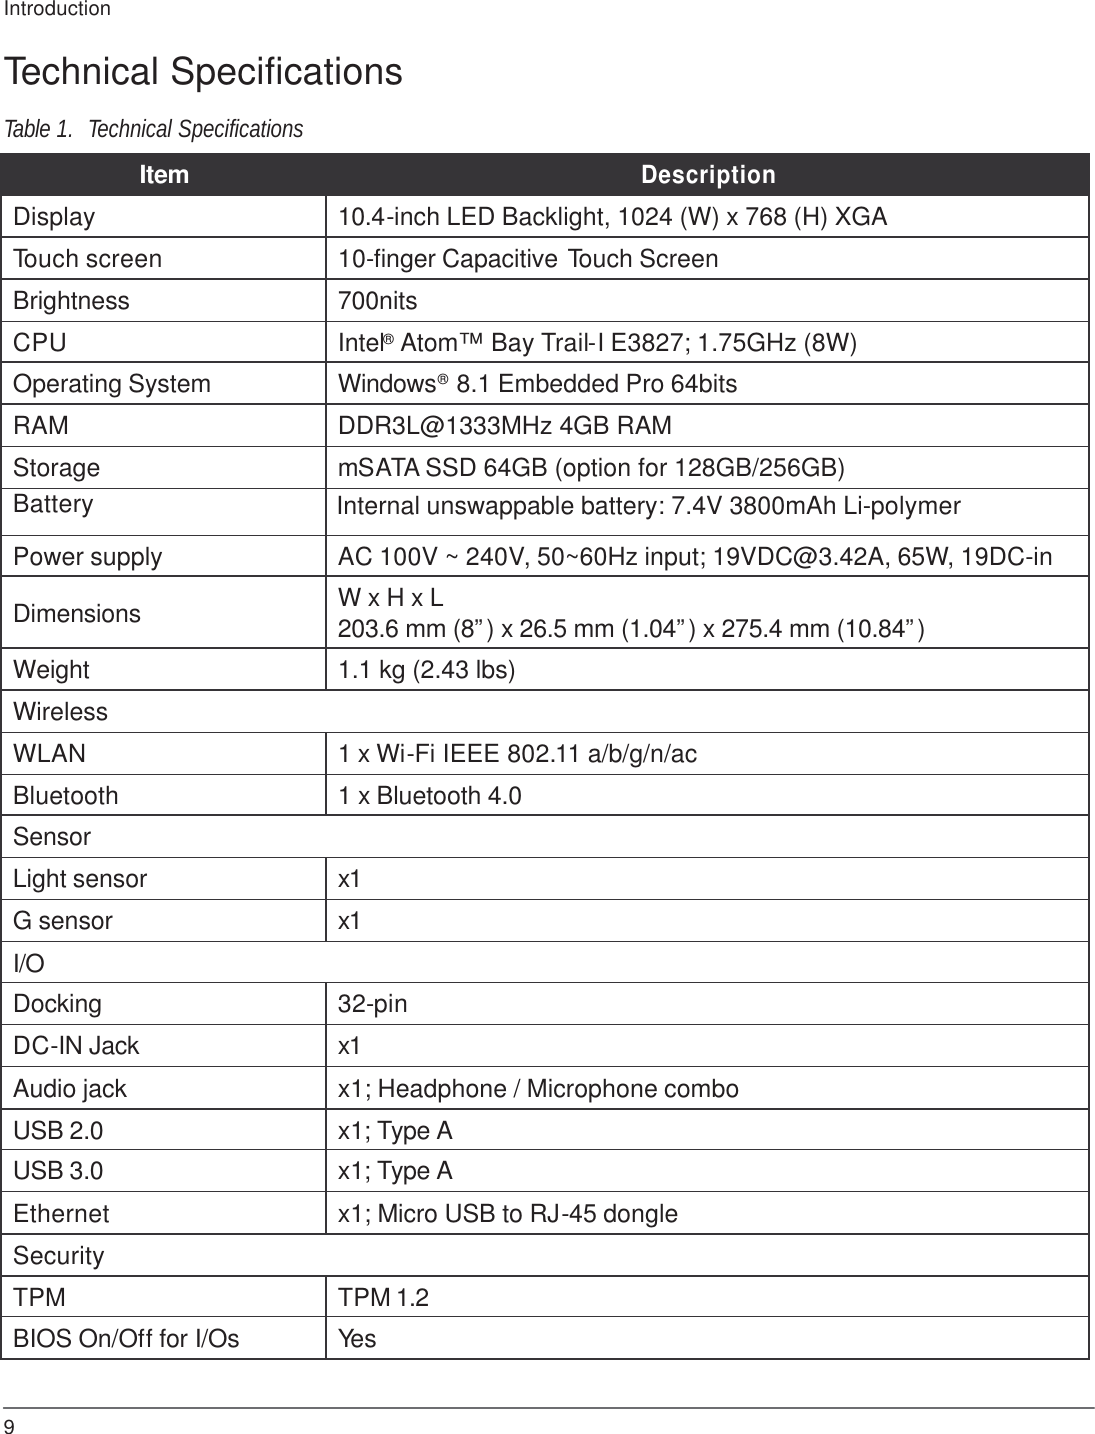 Introduction  Technical Specifications  Table 1.  Technical Specifications  Item Description Display 10.4-inch LED Backlight, 1024 (W) x 768 (H) XGA Touch screen 10-finger Capacitive Touch Screen Brightness 700nits CPU Intel® Atom™ Bay Trail-I E3827; 1.75GHz (8W) Operating System Windows® 8.1 Embedded Pro 64bits RAM DDR3L@1333MHz 4GB RAM Storage mSATA SSD 64GB (option for 128GB/256GB) Battery Internal unswappable battery: 7.4V 3800mAh Li-polymer Power supply AC 100V ~ 240V, 50~60Hz input; 19VDC@3.42A, 65W, 19DC-in  Dimensions W x H x L 203.6 mm (8”) x 26.5 mm (1.04”) x 275.4 mm (10.84”)  Weight 1.1 kg (2.43 lbs) Wireless WLAN 1 x Wi-Fi IEEE 802.11 a/b/g/n/ac Bluetooth 1 x Bluetooth 4.0 Sensor Light sensor x1 G sensor x1 I/O Docking 32-pin DC-IN Jack x1 Audio jack x1; Headphone / Microphone combo USB 2.0 x1; Type A USB 3.0 x1; Type A Ethernet x1; Micro USB to RJ-45 dongle Security TPM TPM 1.2 BIOS On/Off for I/Os Yes    9 